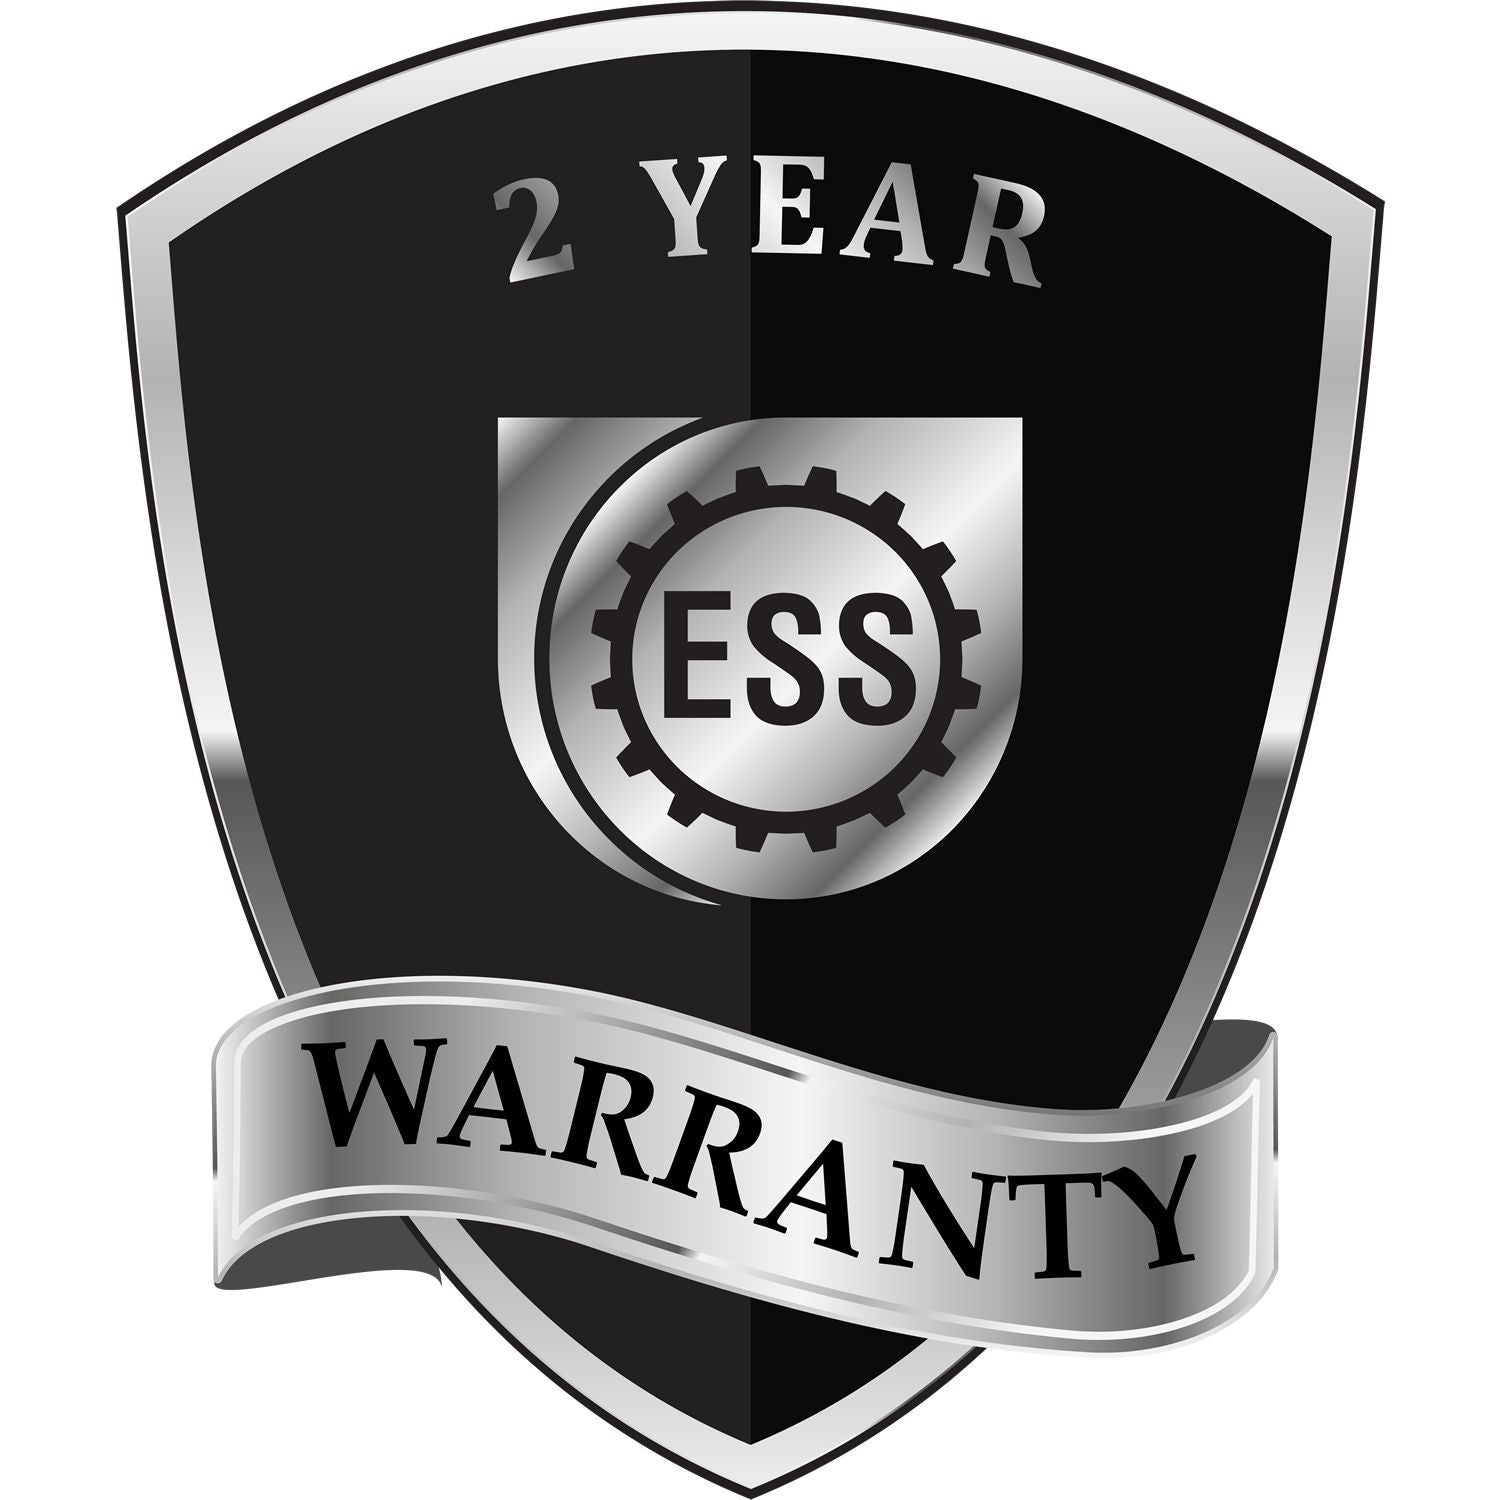 A badge or emblem showing a warranty icon for the Long Reach Colorado PE Seal